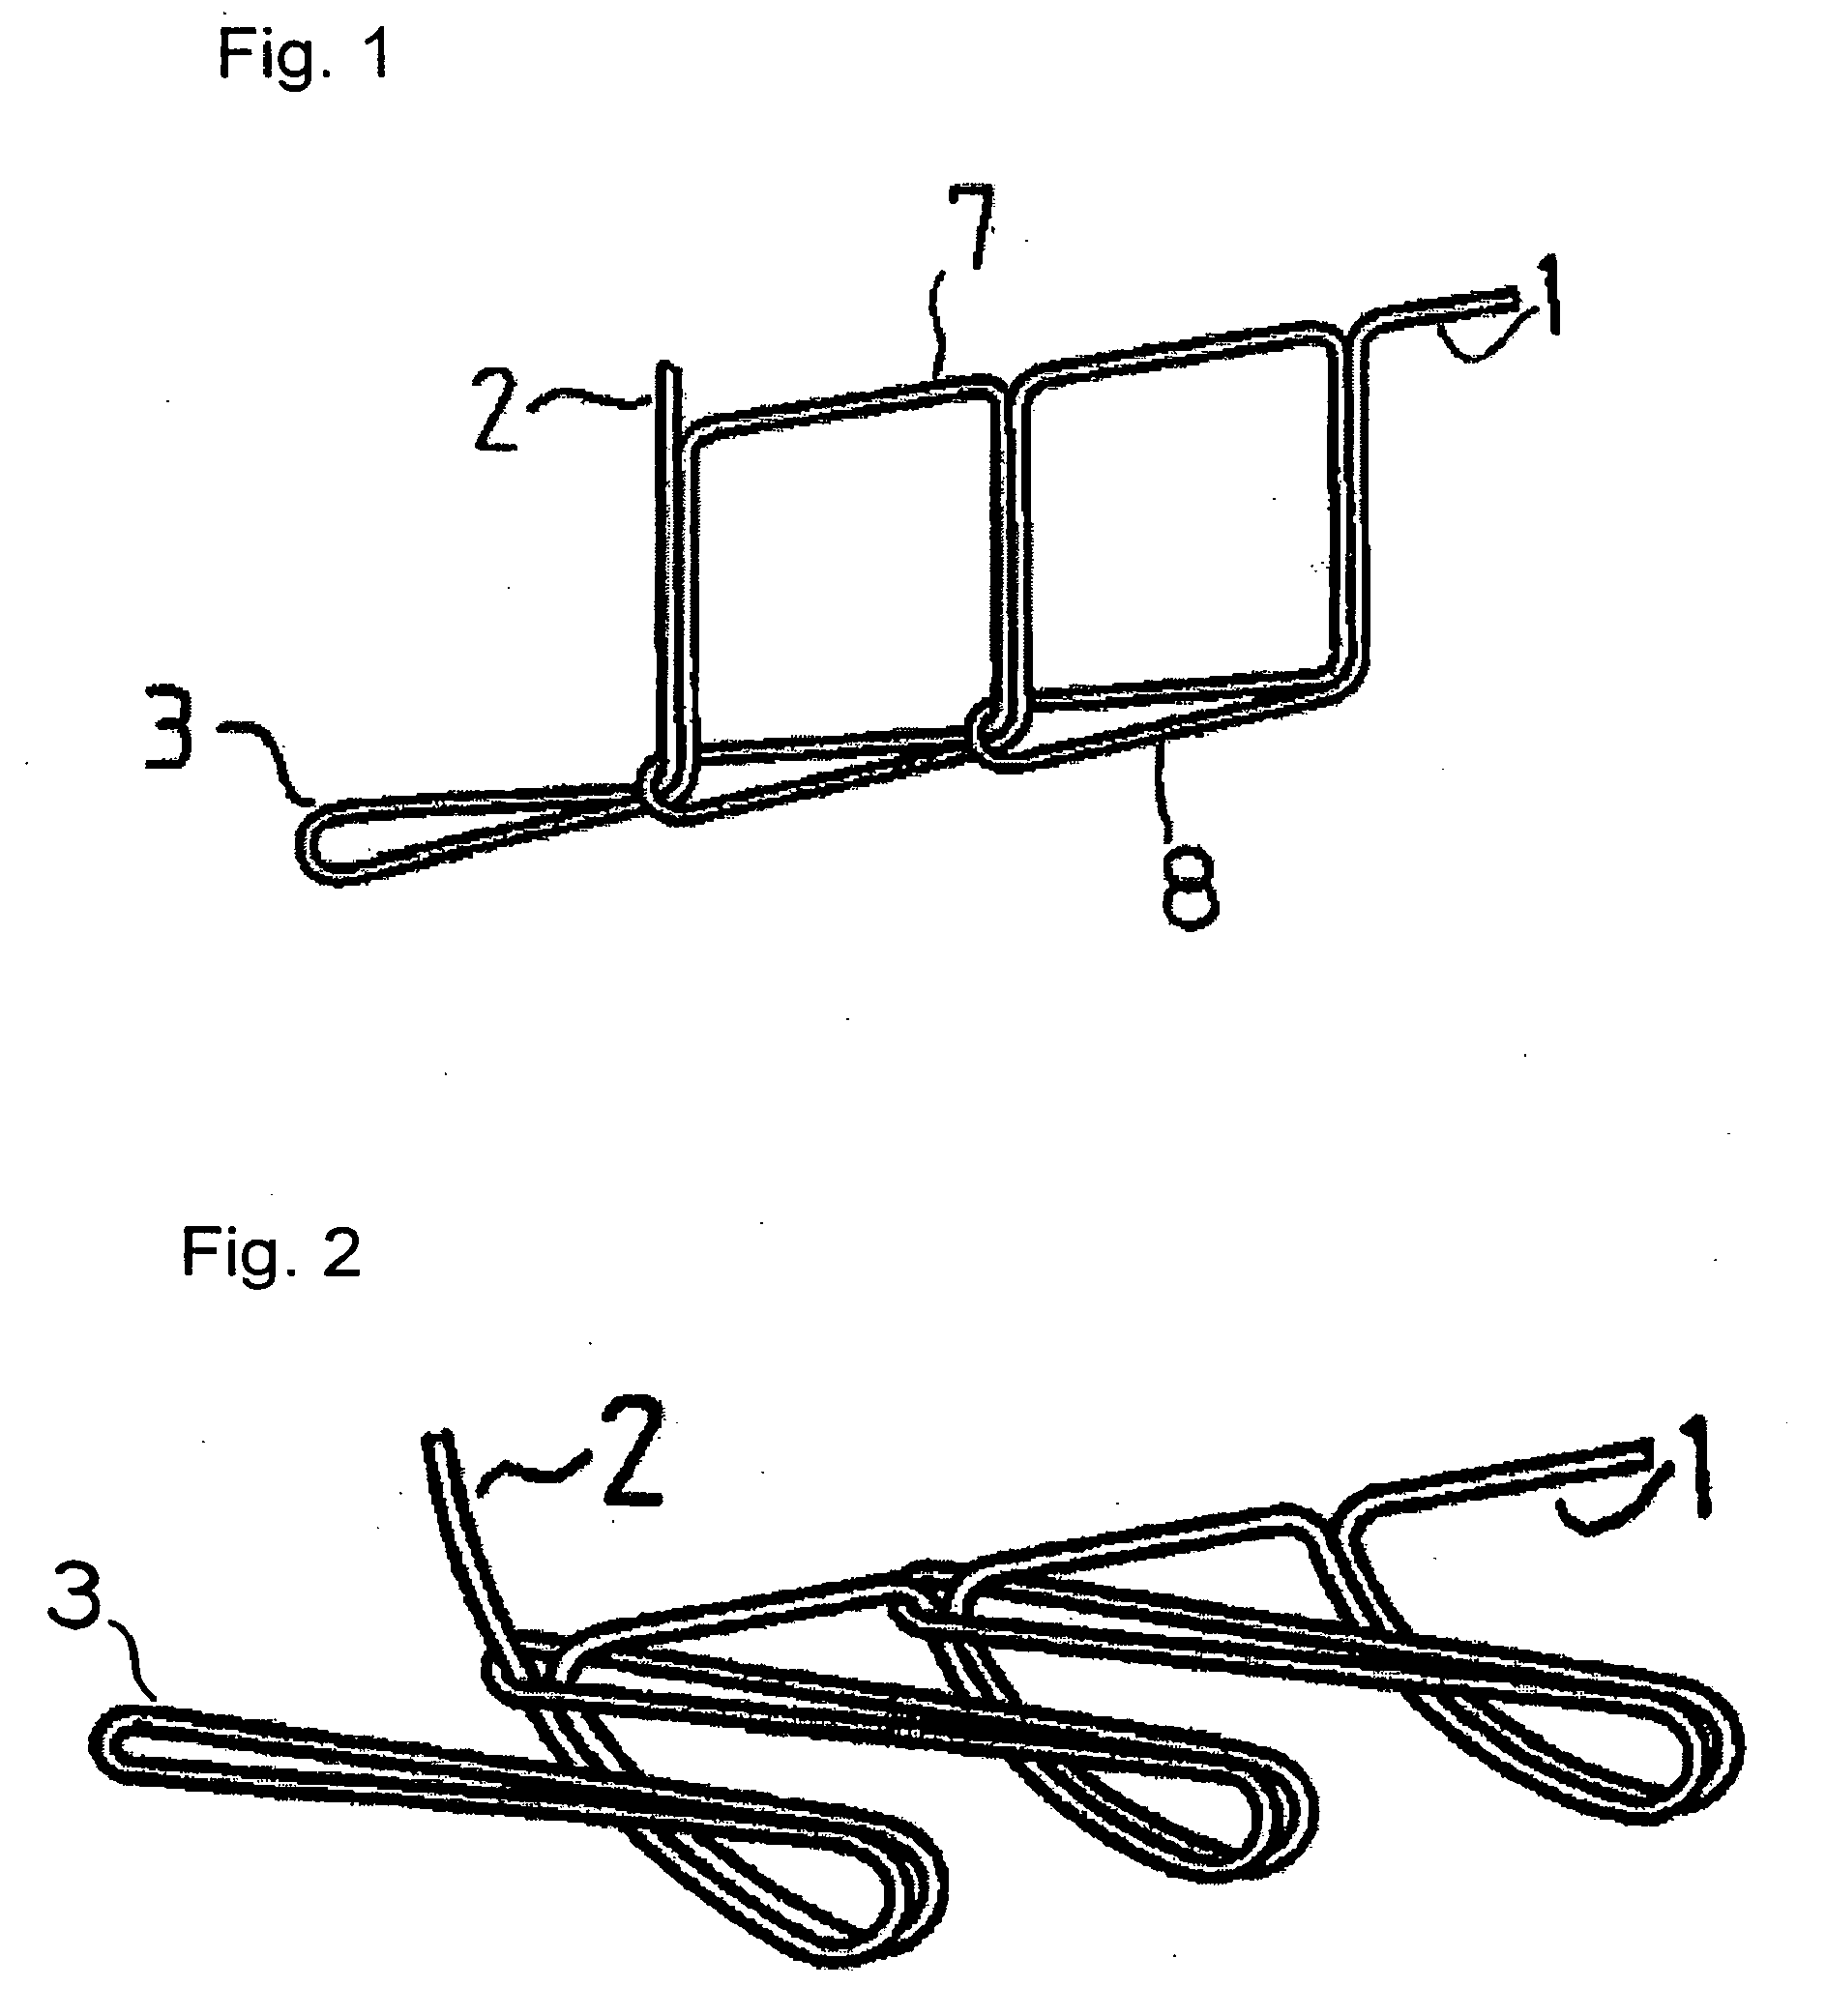 Suture reinforcement material for automatic suturing device